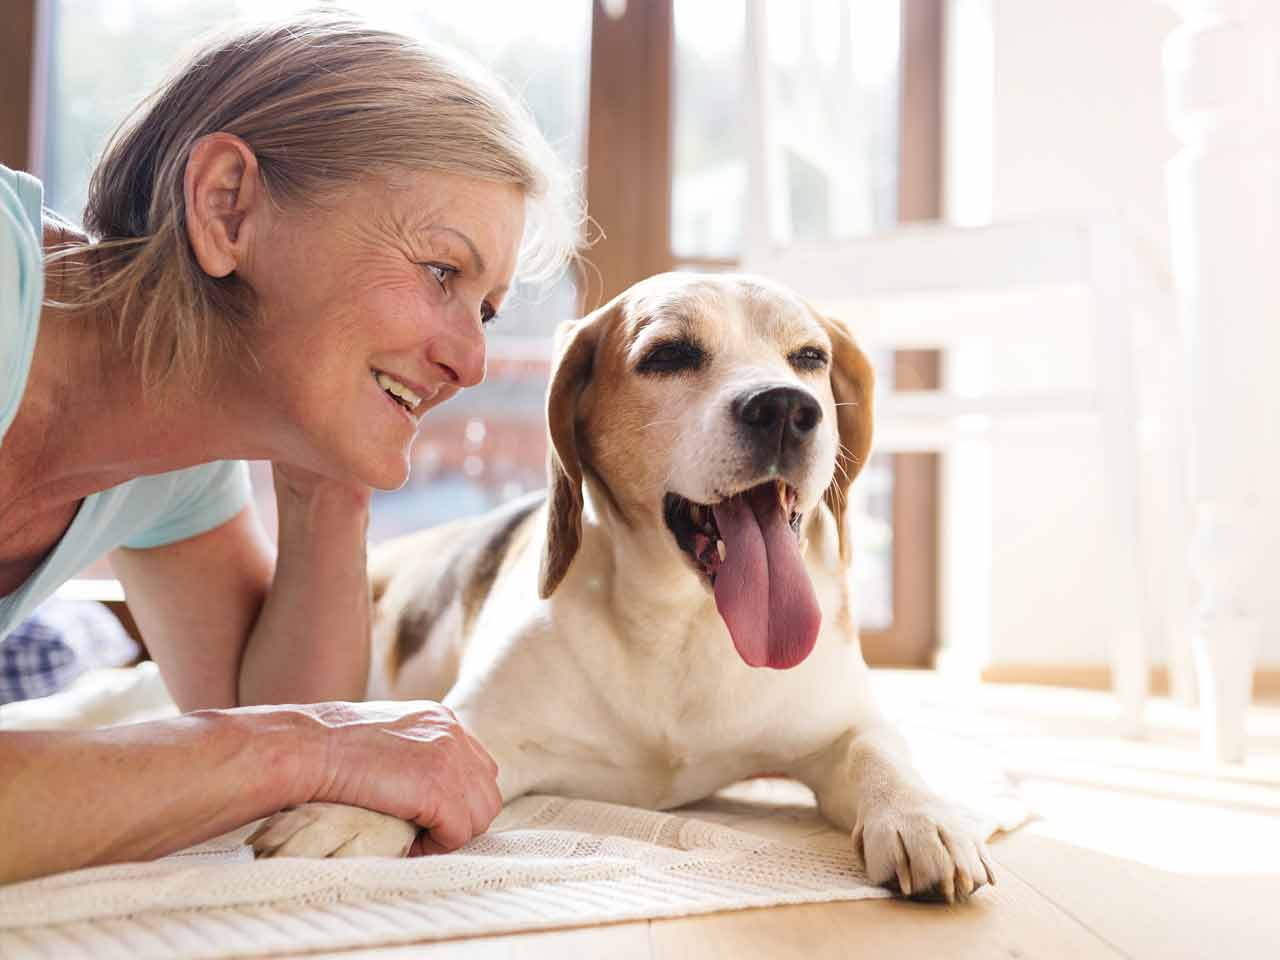 Woman with beagle